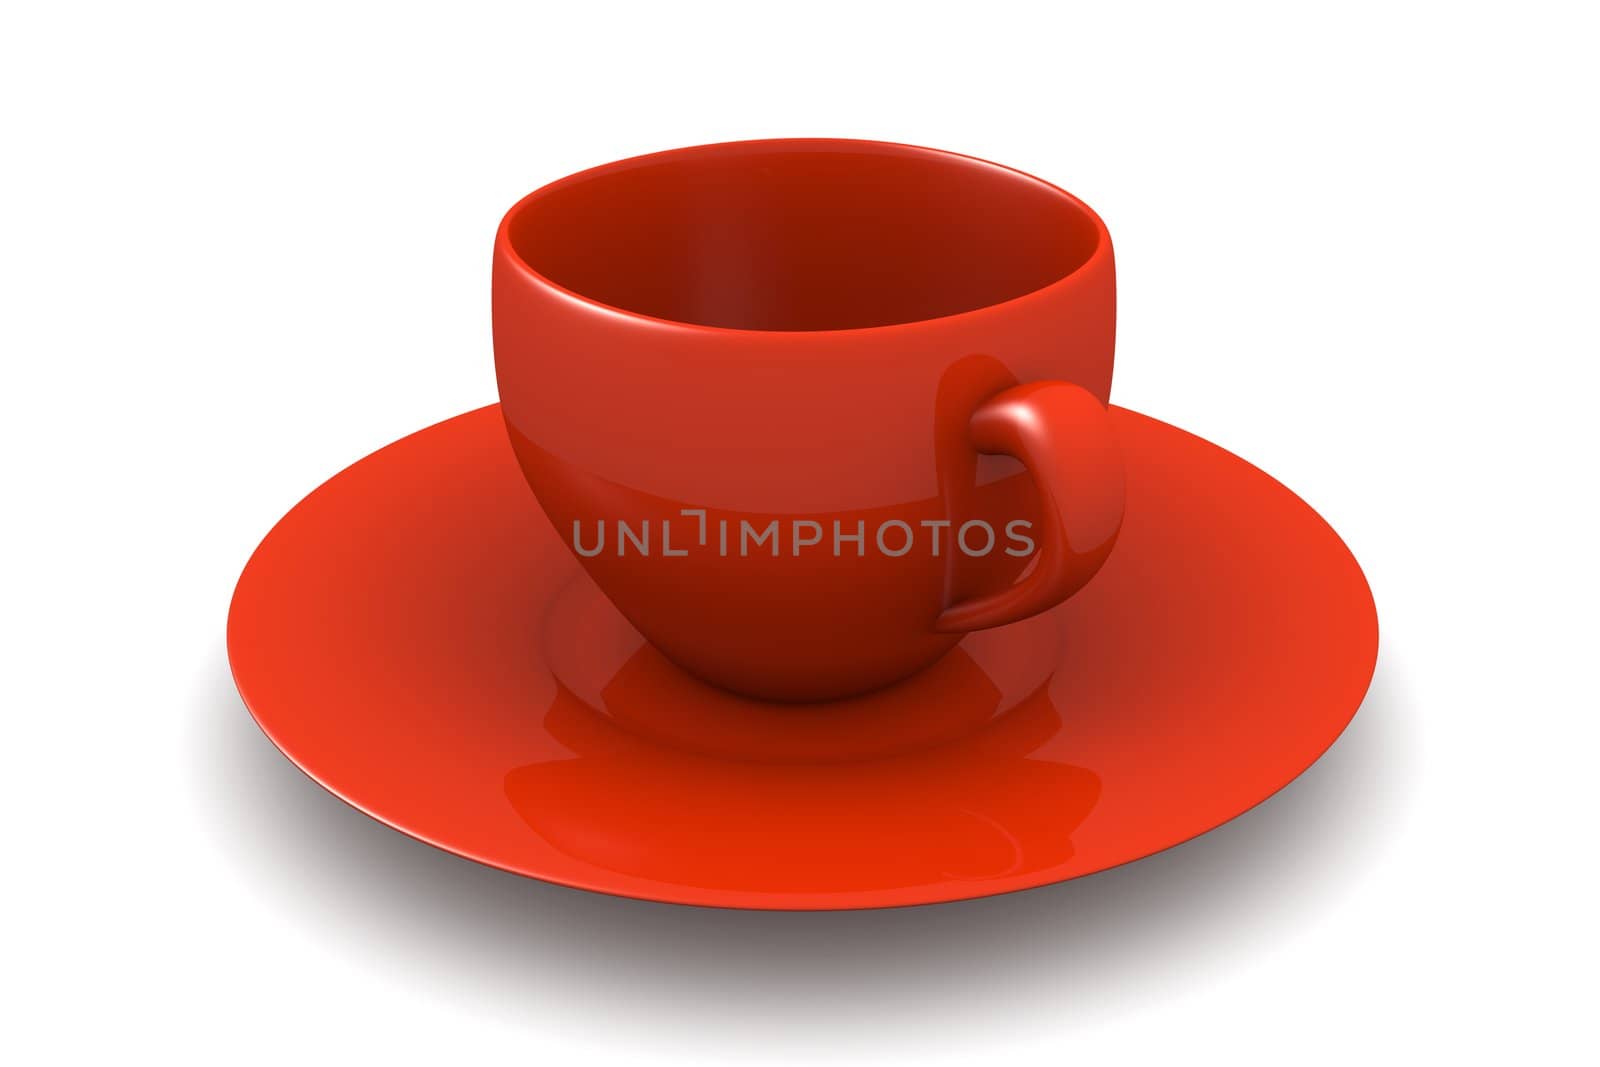 3D rendered Illustration. A red coffee or tea cup. Isolated on white.